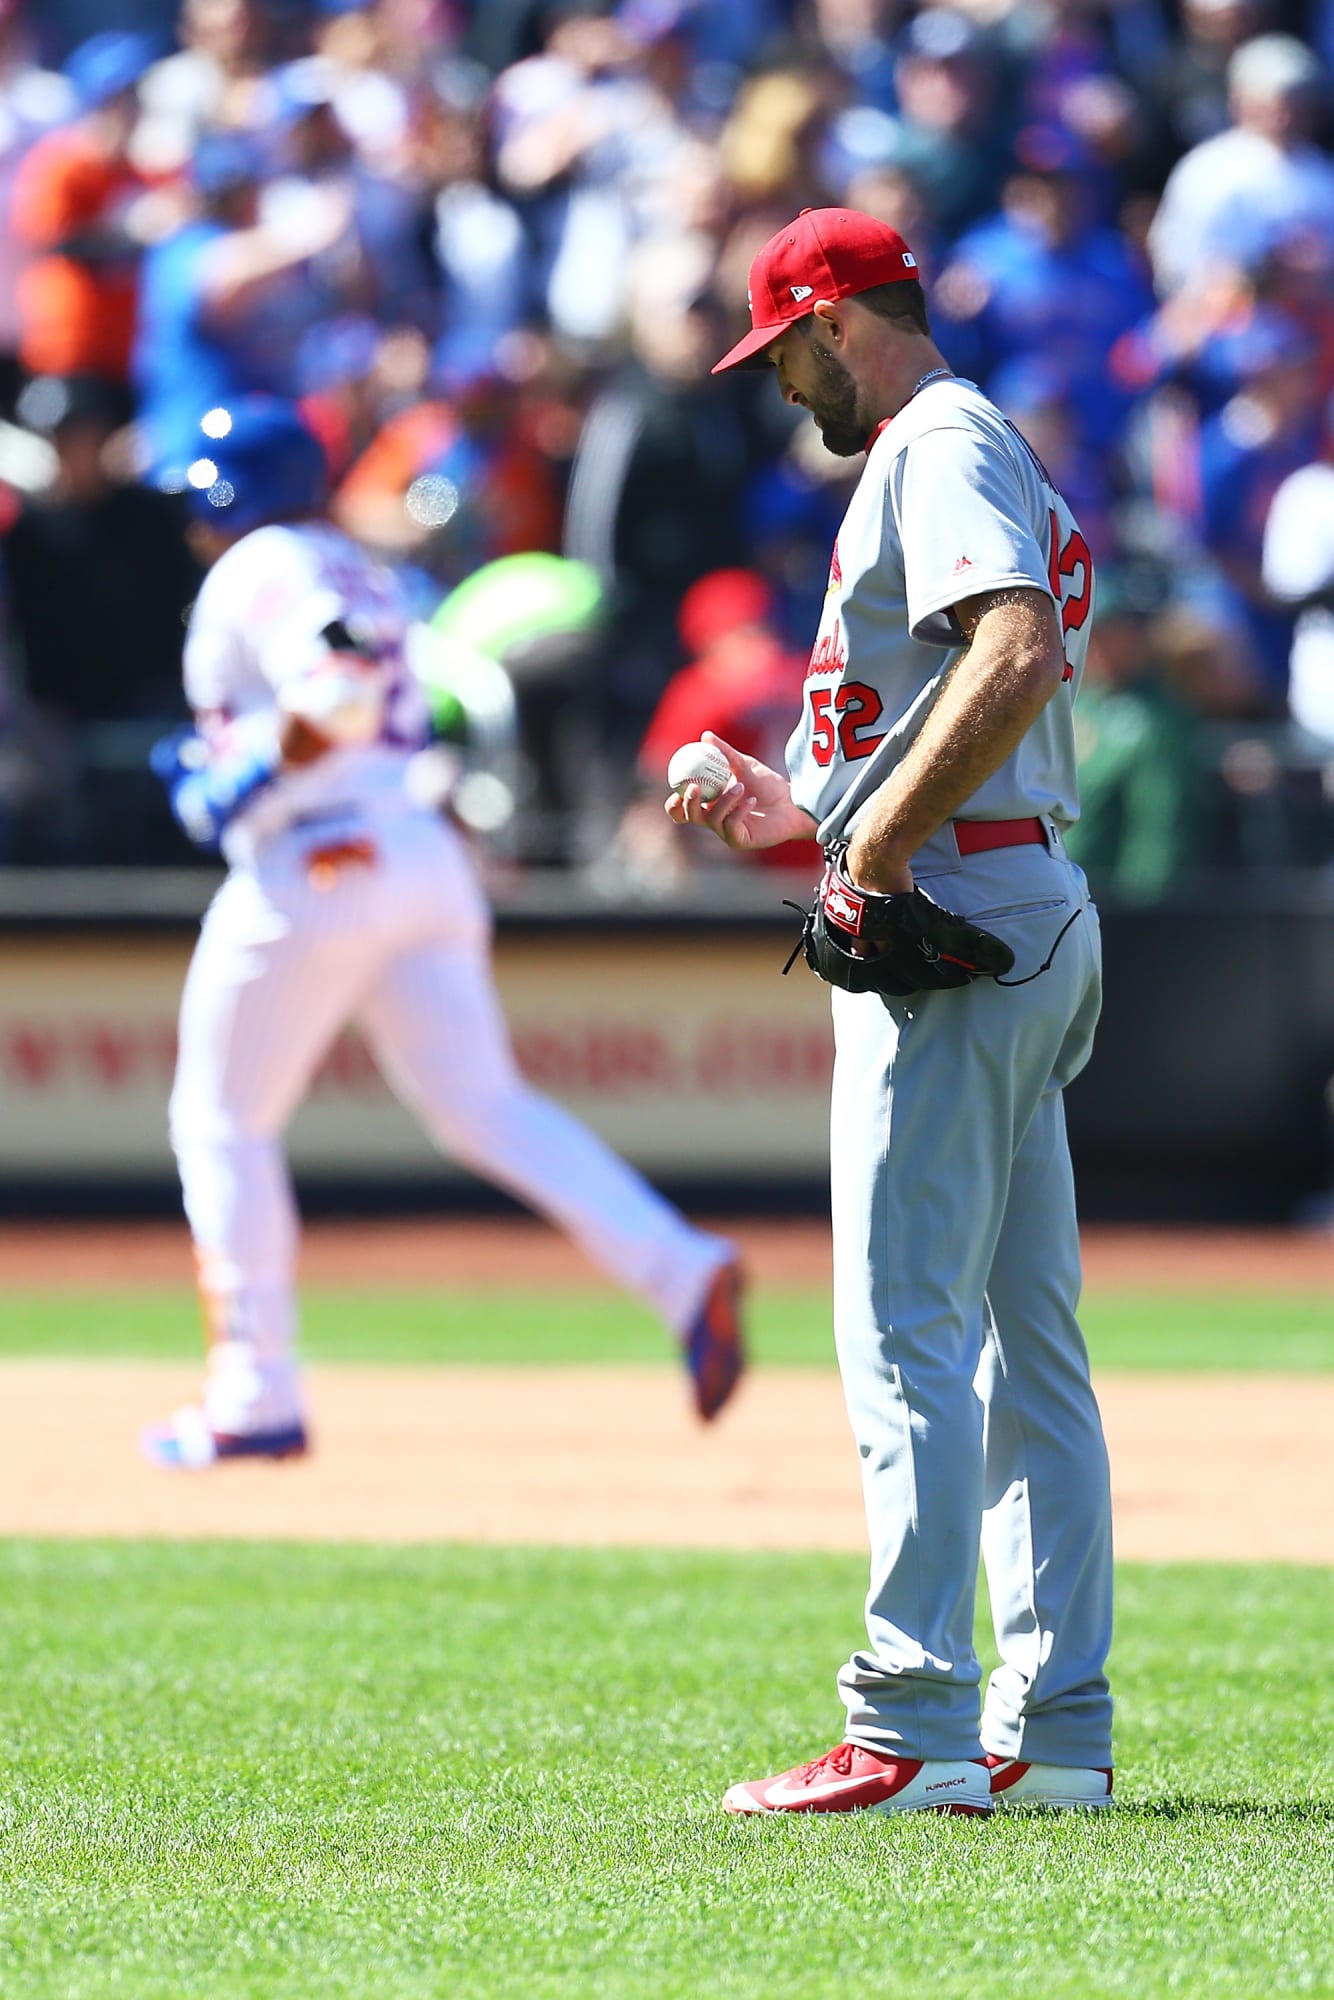 St. Louis Cardinals: Game two as disappointing as game one